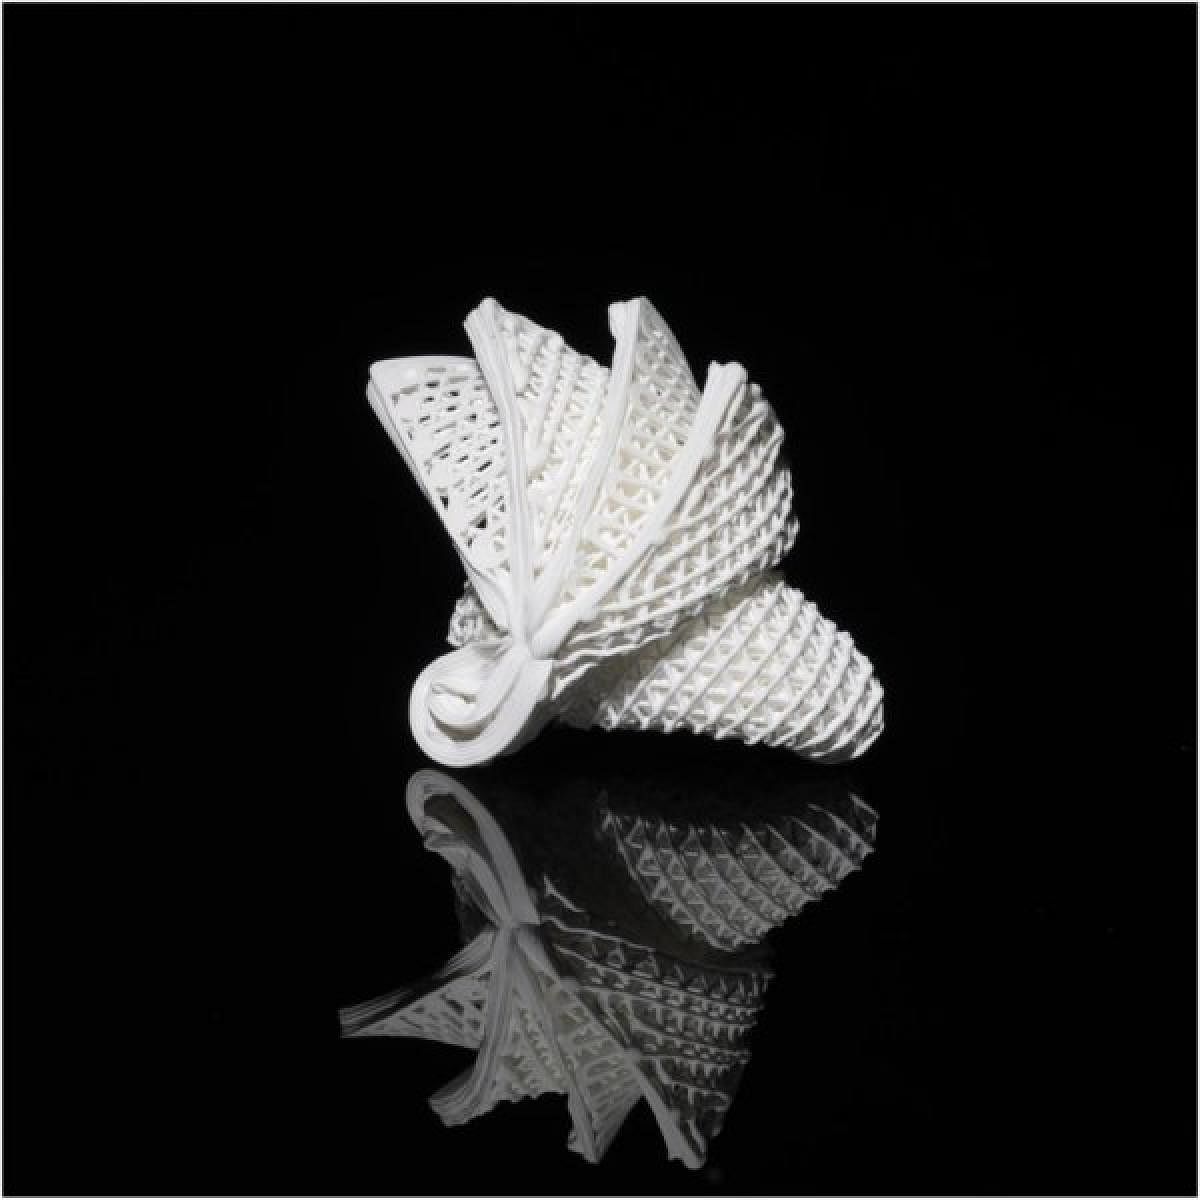 World's first 4D printing for ceramics developed